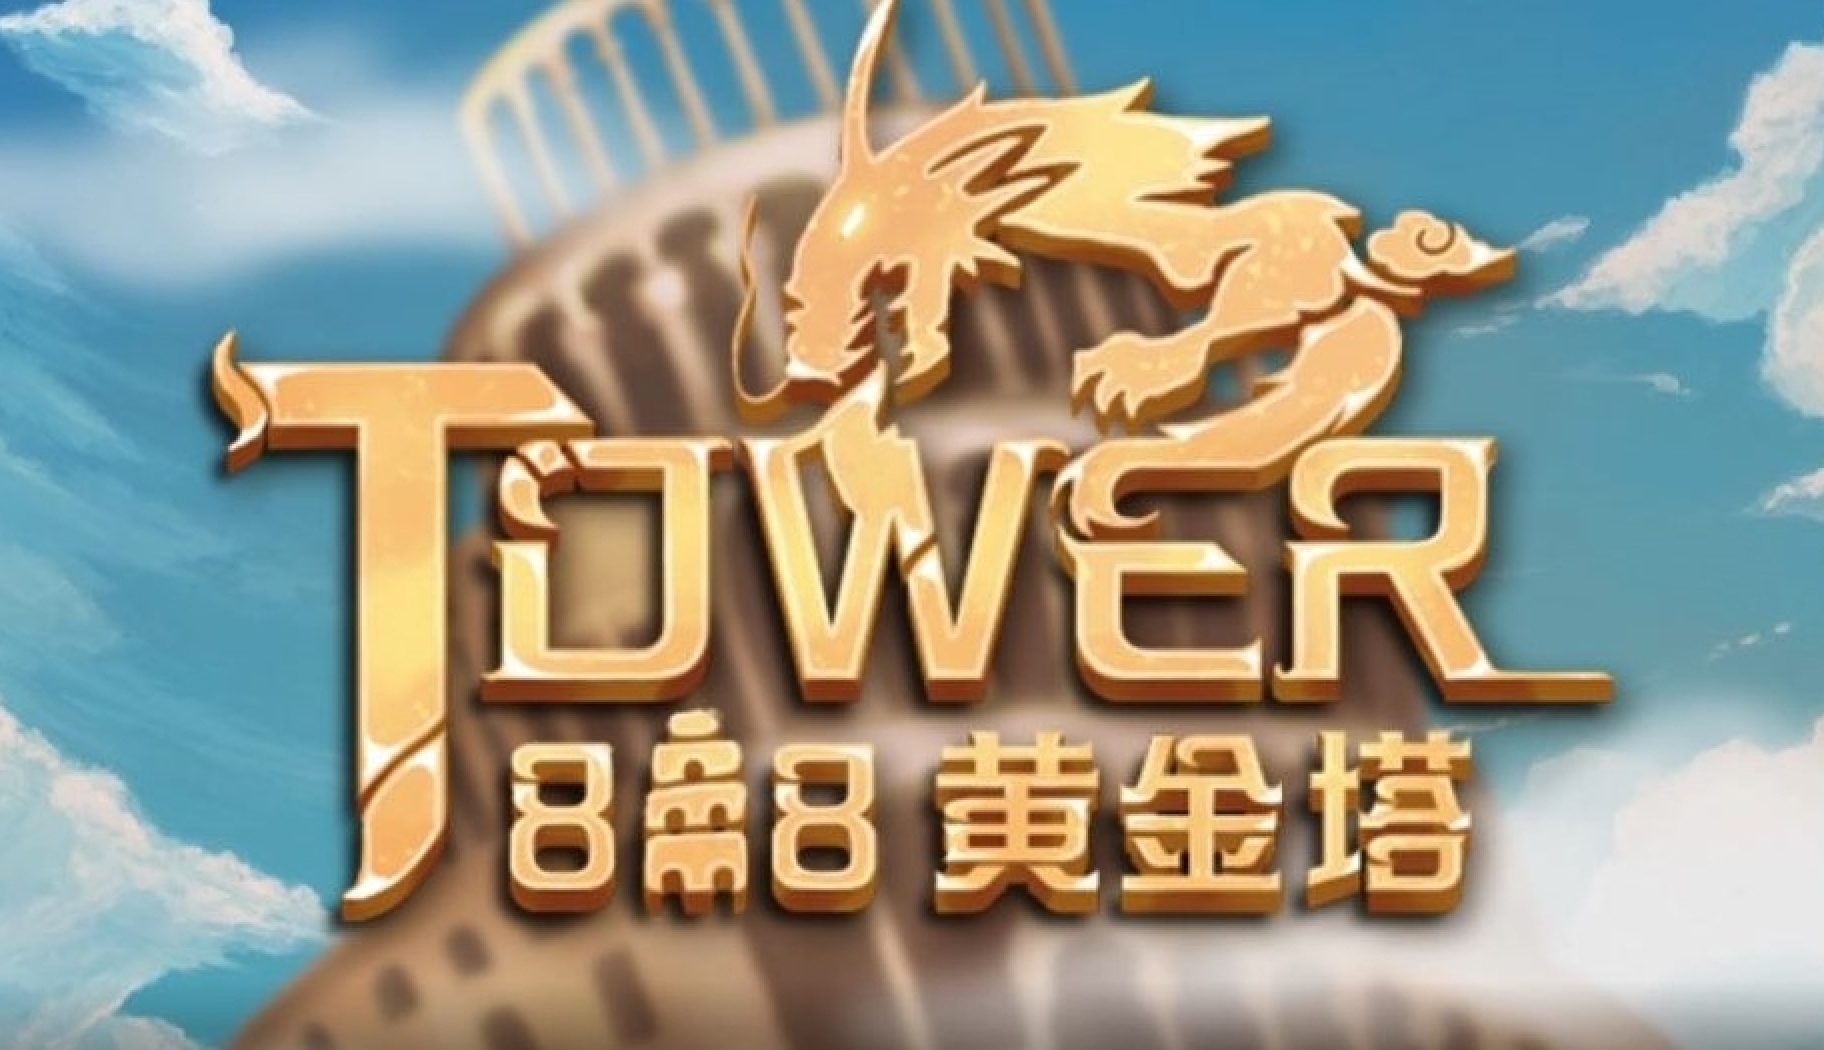 The 888 Tower Online Slot Demo Game by AllWaySpin